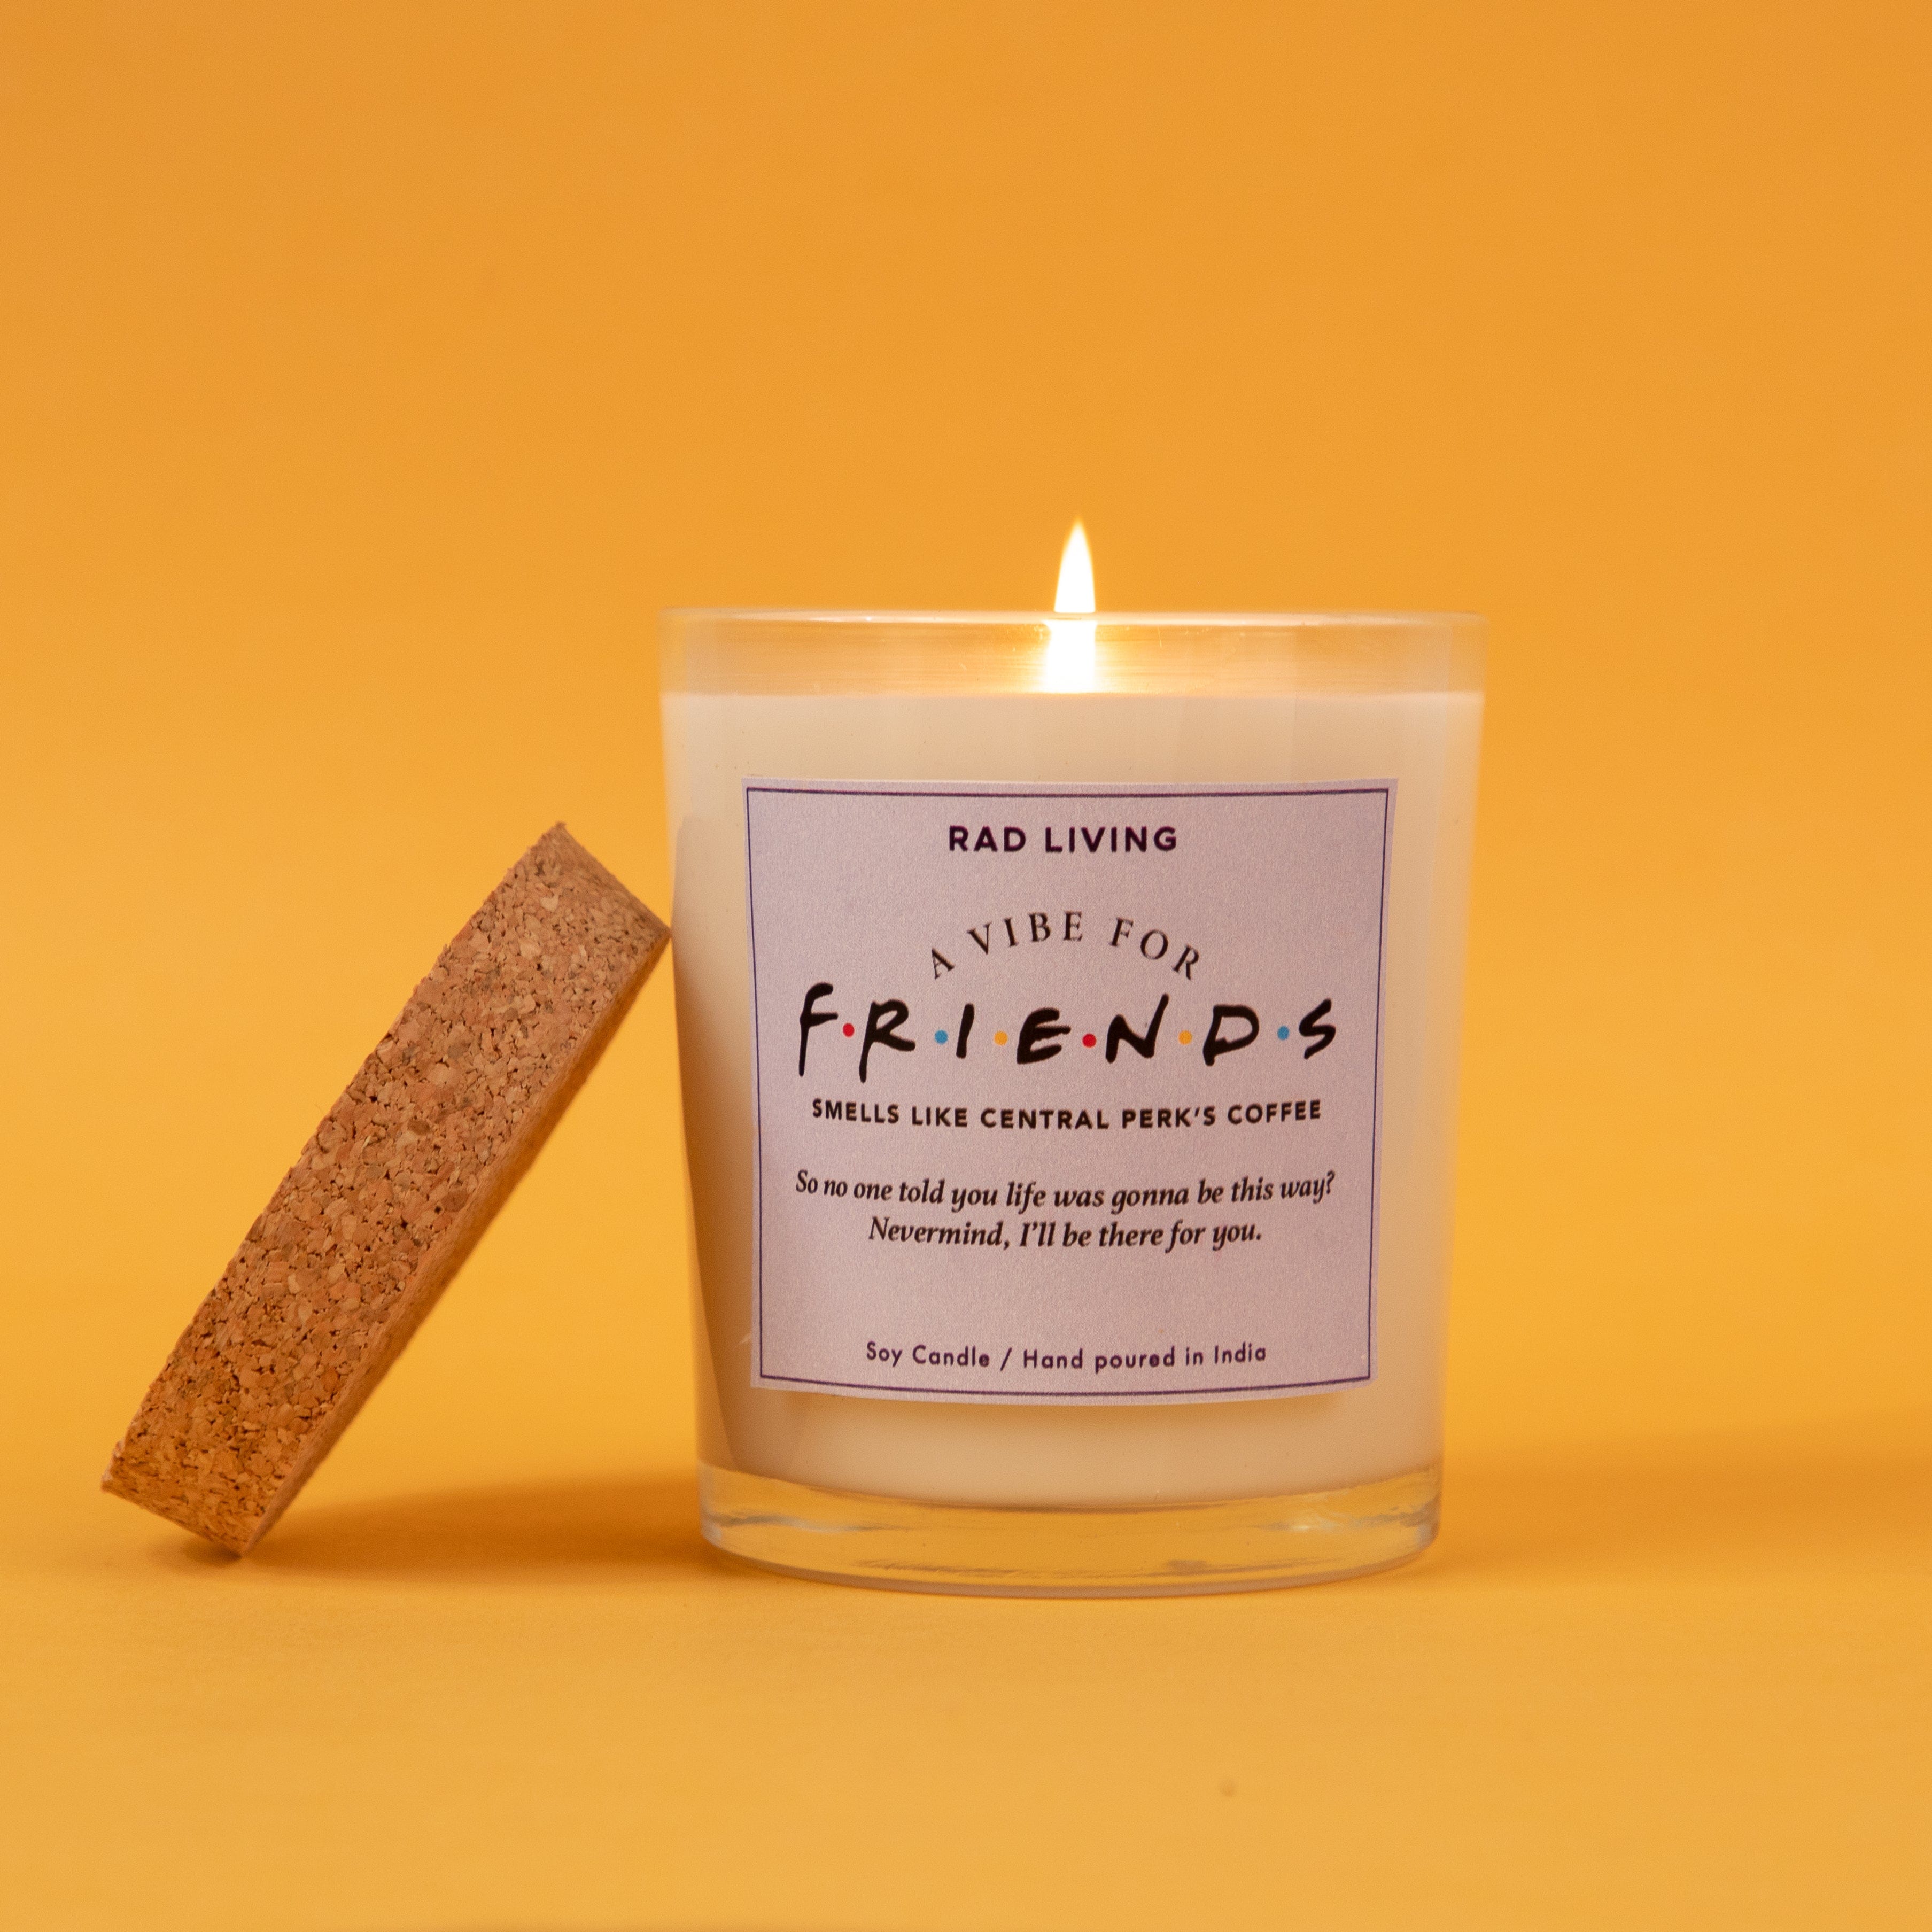 F.R.I.E.N.D.S - Central Perk's Coffee Scented Candle